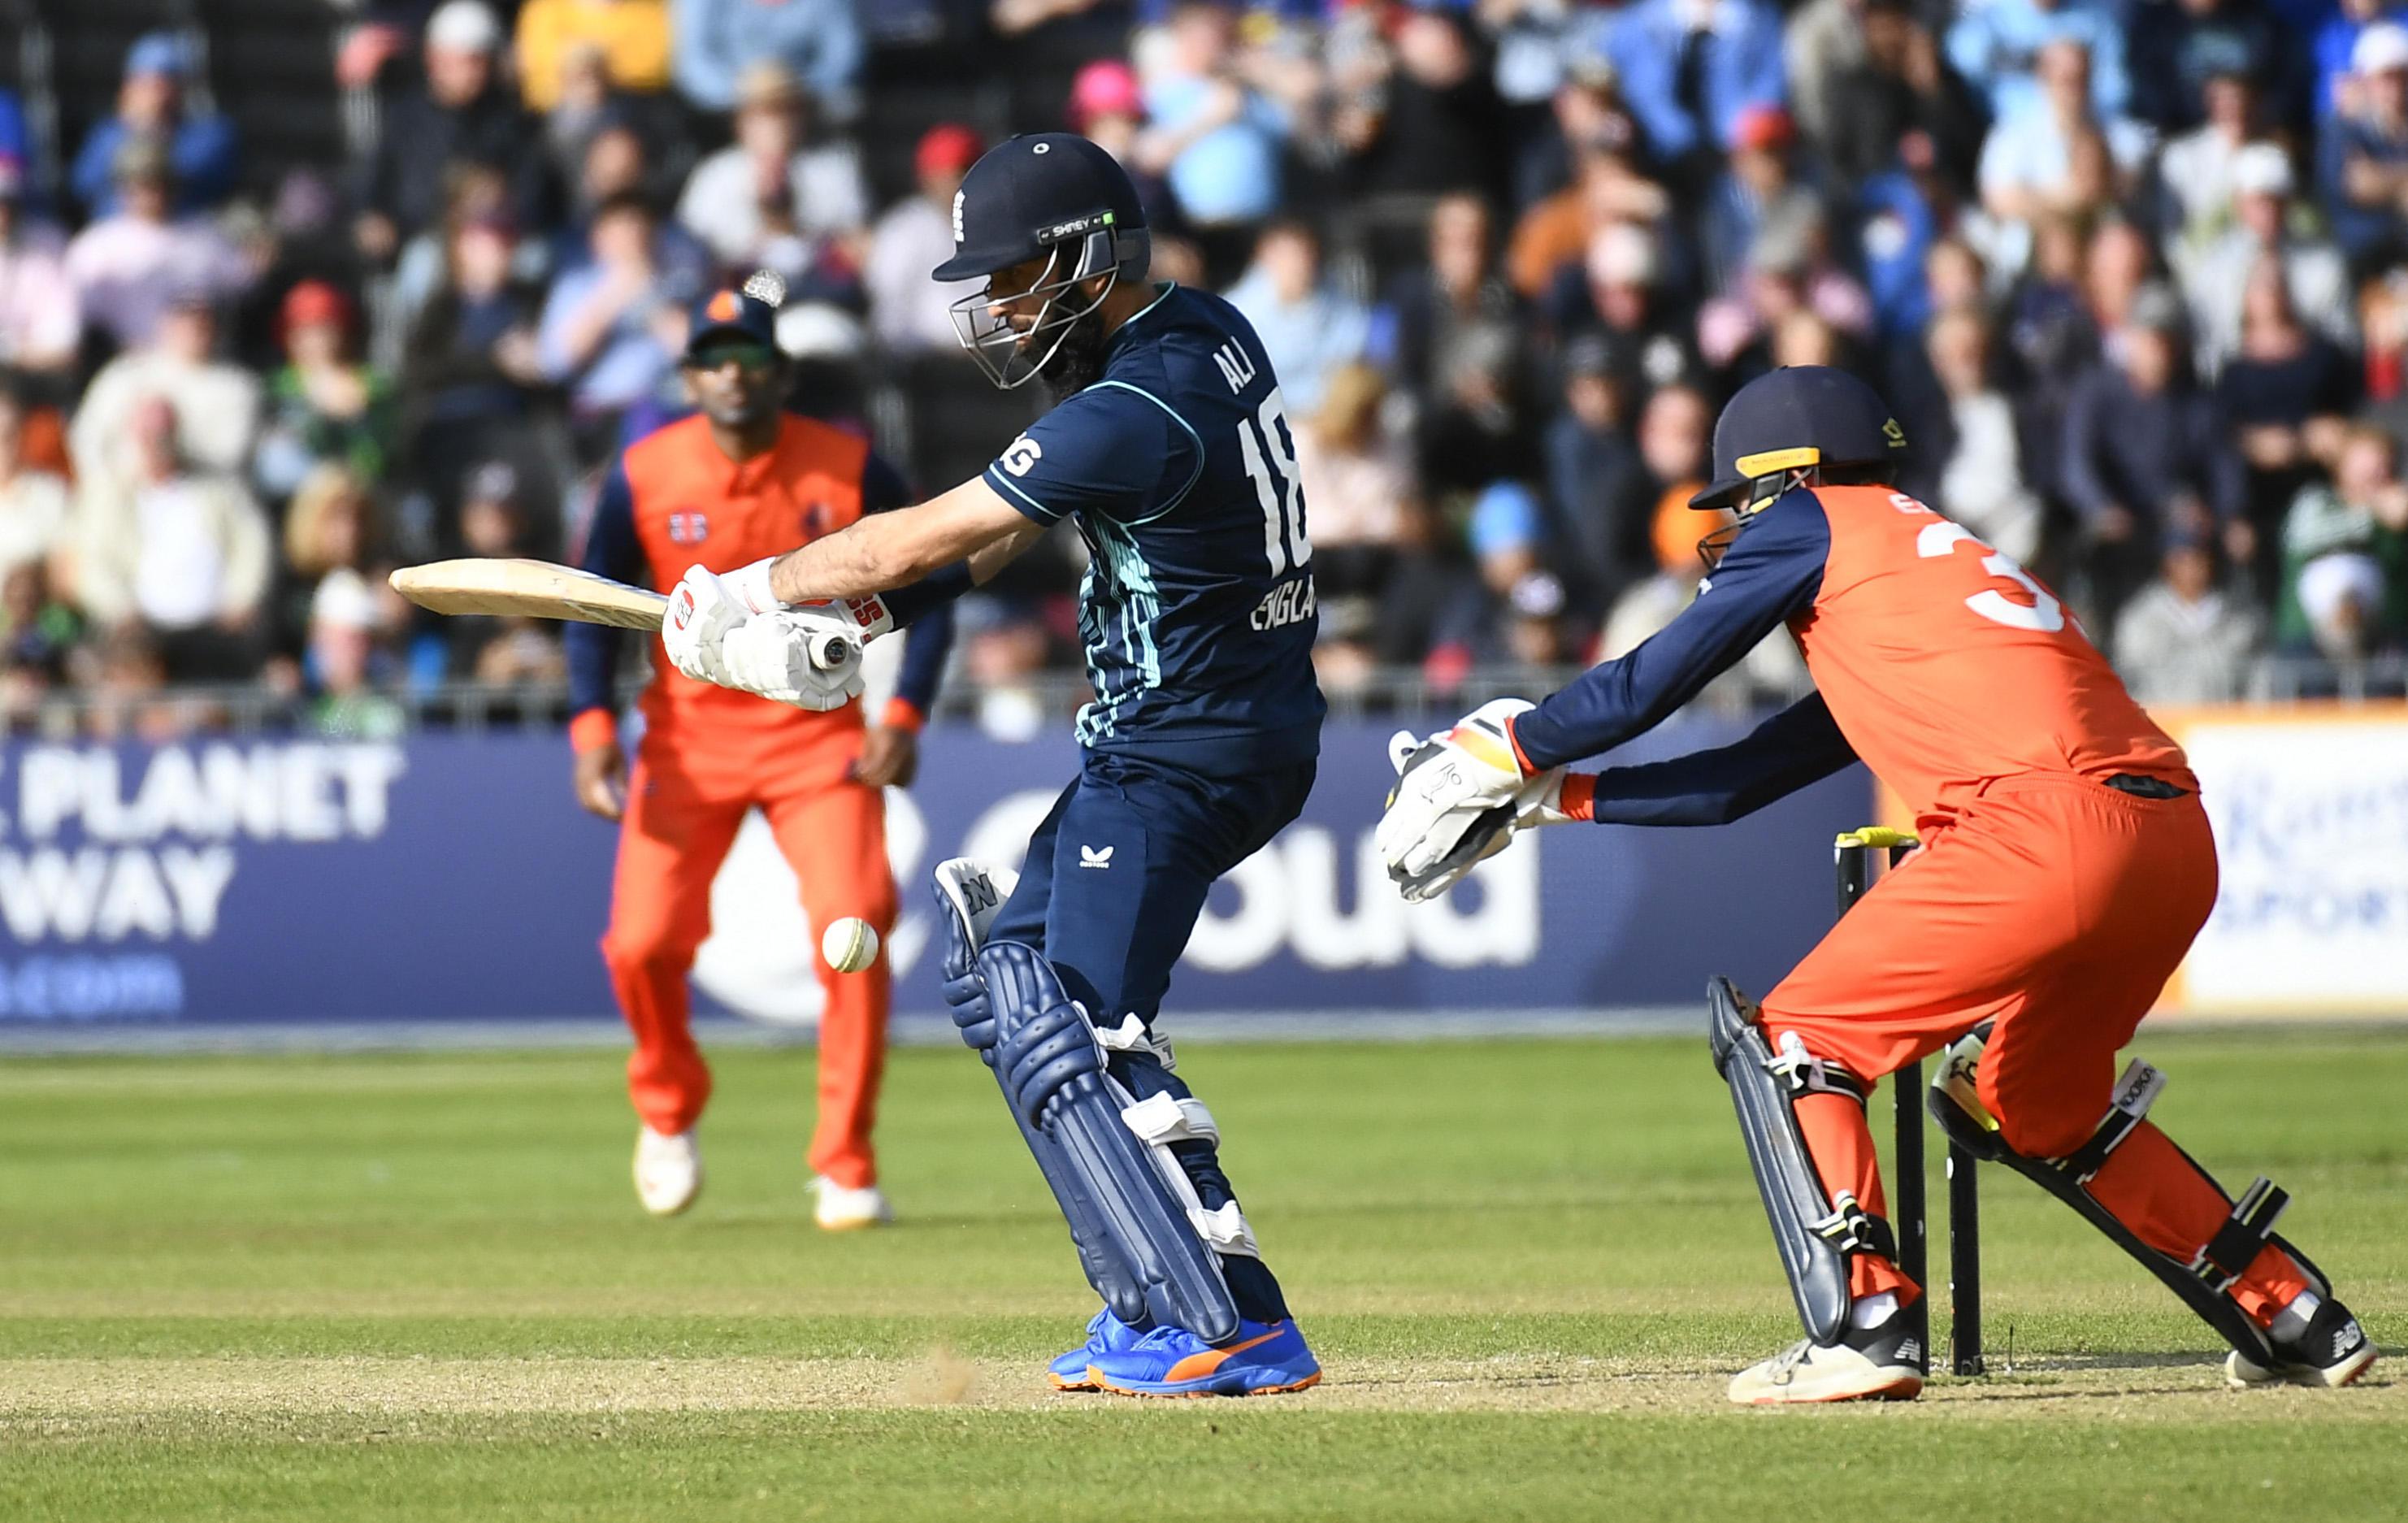 NED vs ENG: No fireworks this time as England beat Netherlands in second ODI